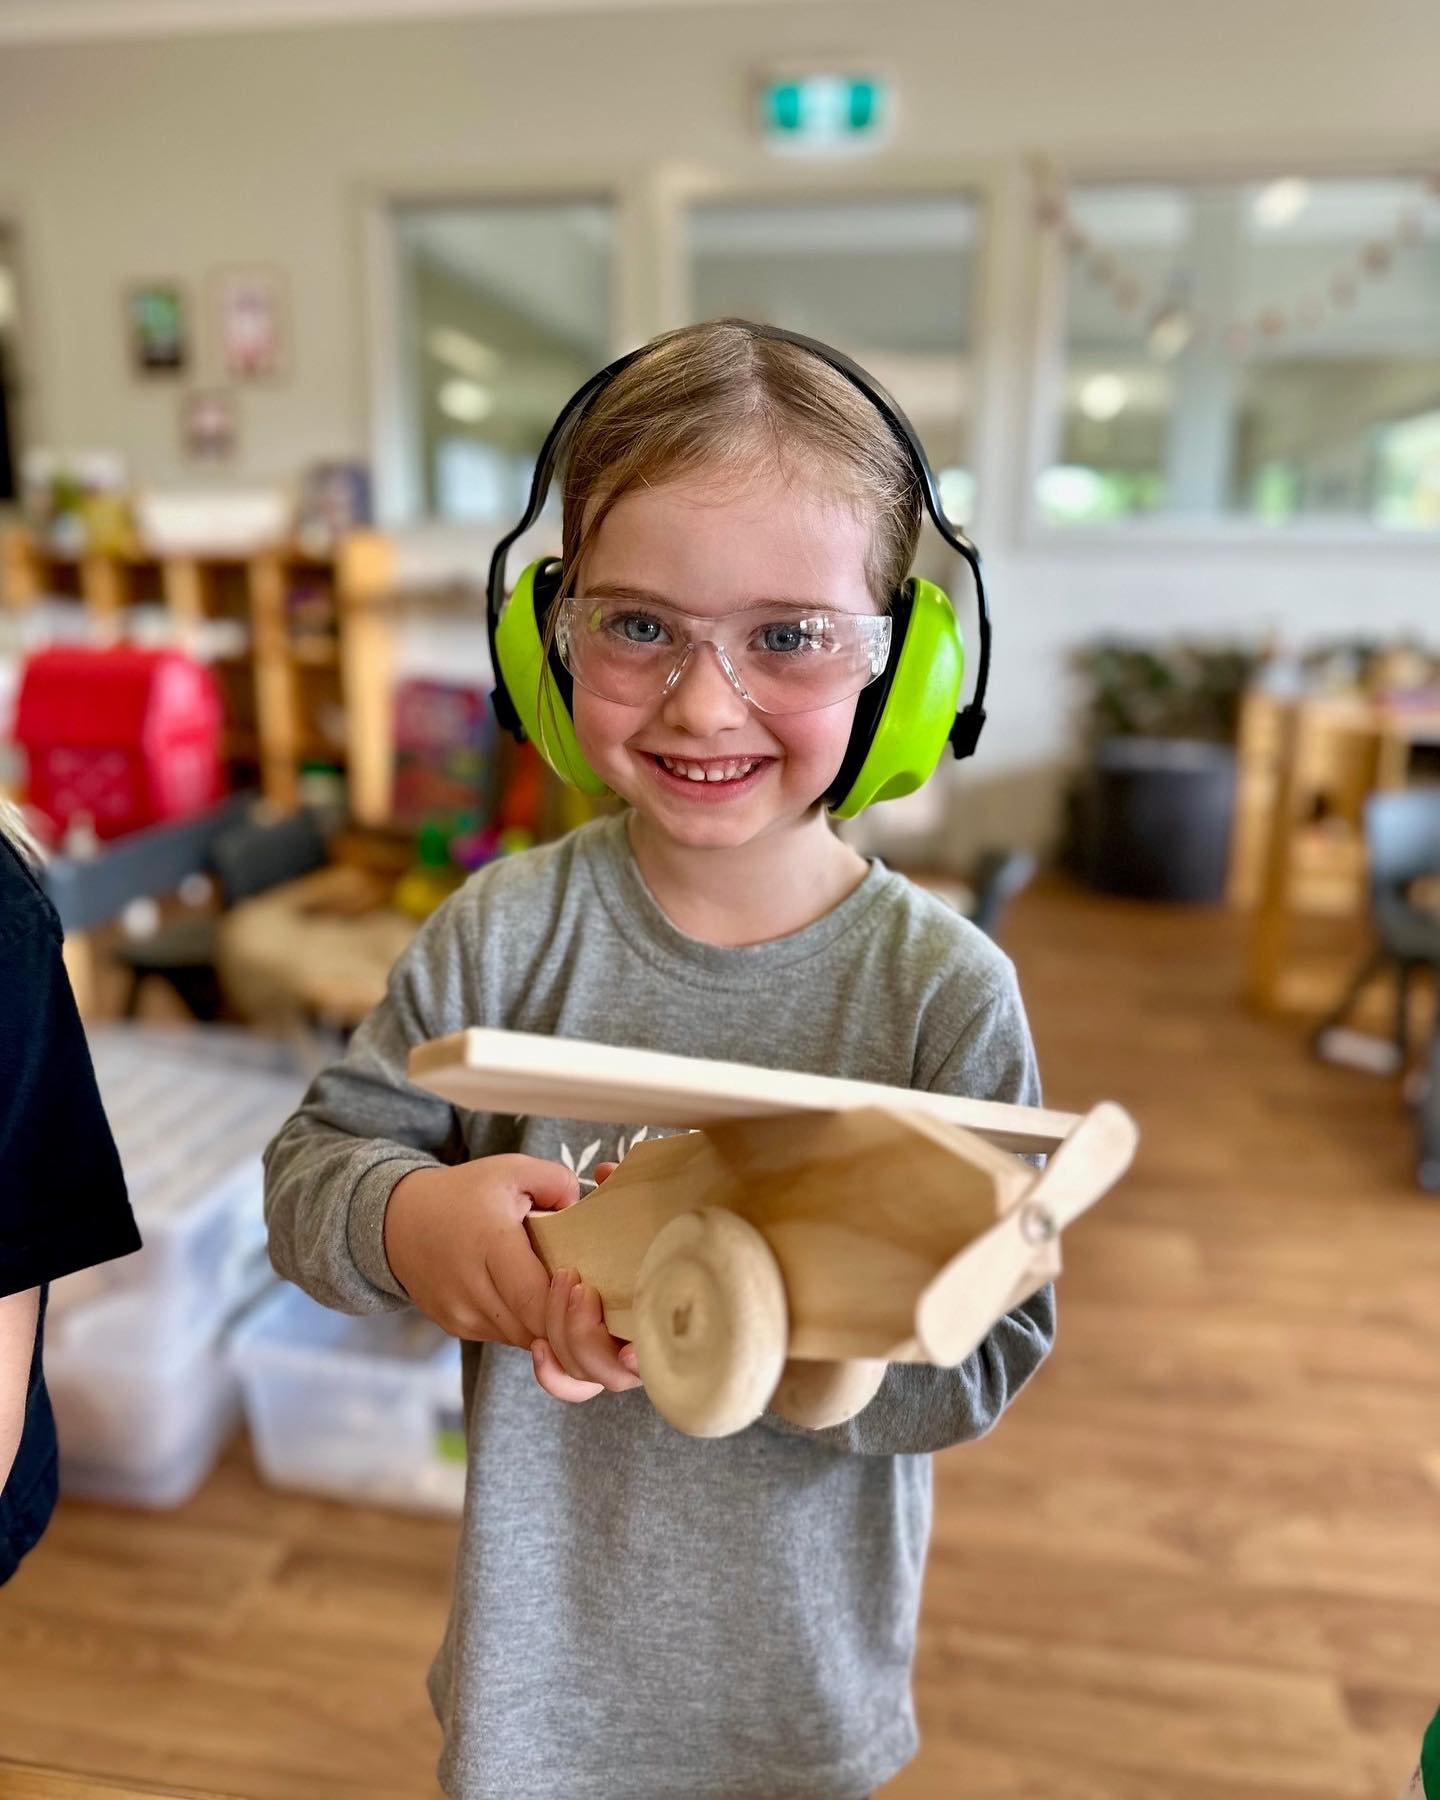 📢 Calling all teachers, parents and supporters! We need your help to spread the word about Little Woodworkers&reg; across Australia!

Whether you have booked with us before, ordered from us or simply love what we do for children, please share this p